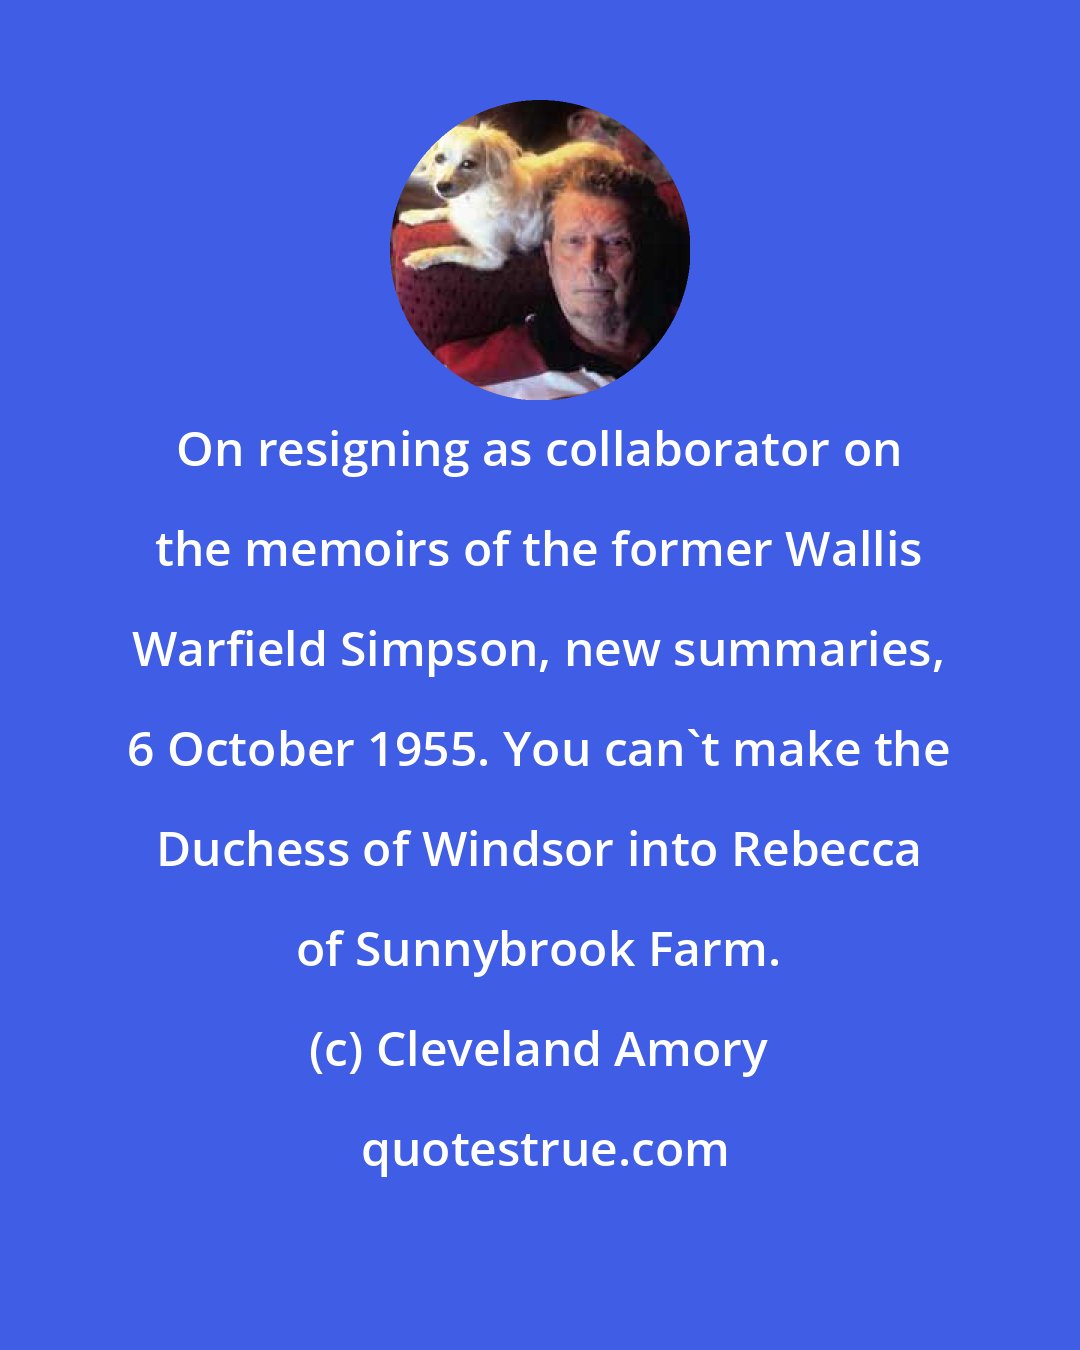 Cleveland Amory: On resigning as collaborator on the memoirs of the former Wallis Warfield Simpson, new summaries, 6 October 1955. You can't make the Duchess of Windsor into Rebecca of Sunnybrook Farm.